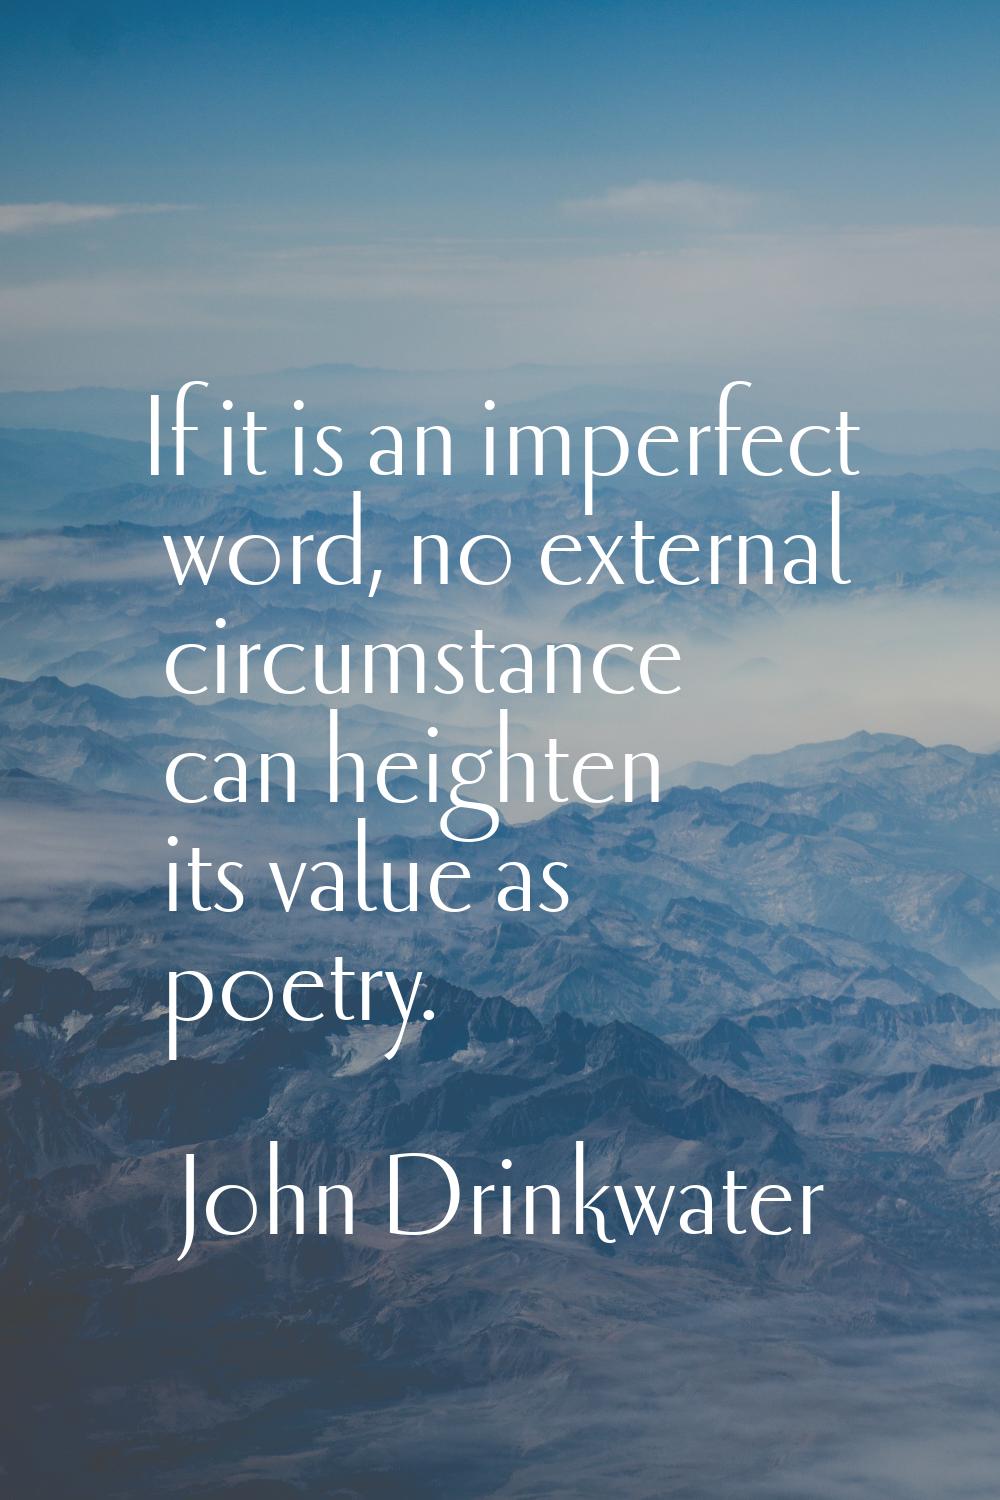 If it is an imperfect word, no external circumstance can heighten its value as poetry.